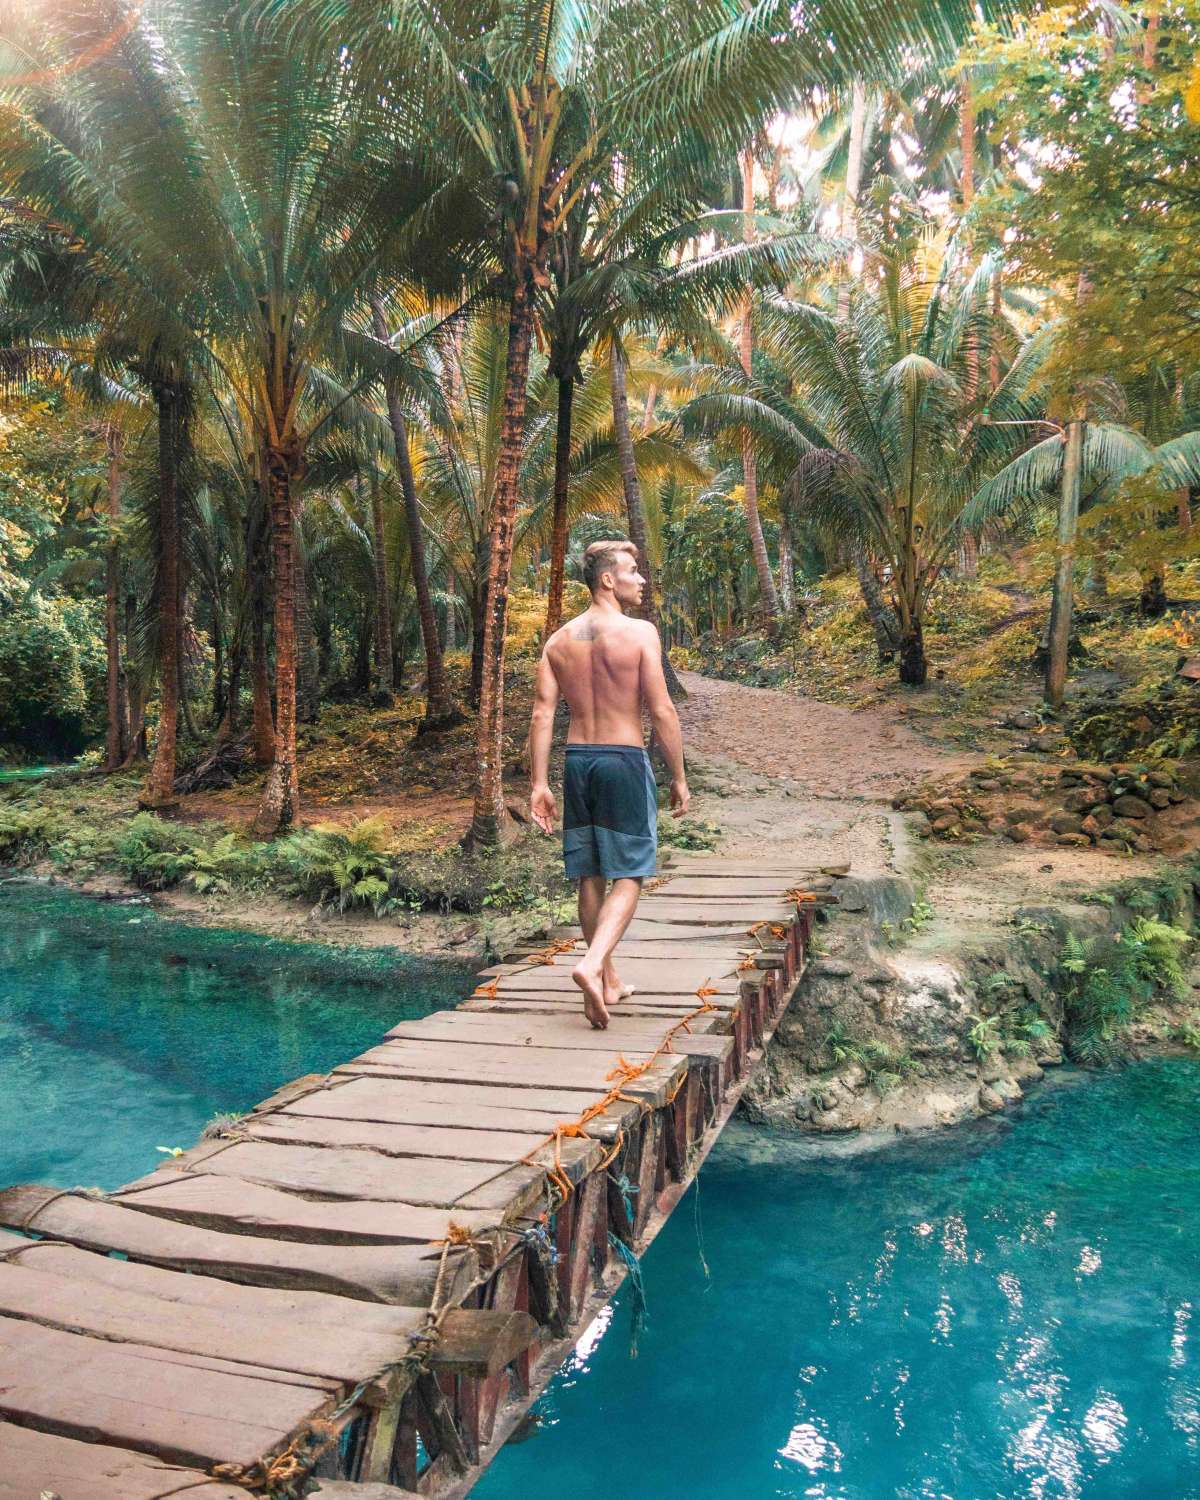 Throwback to the first month on the journey! En route To the incredible Kawasan falls in the Philippines